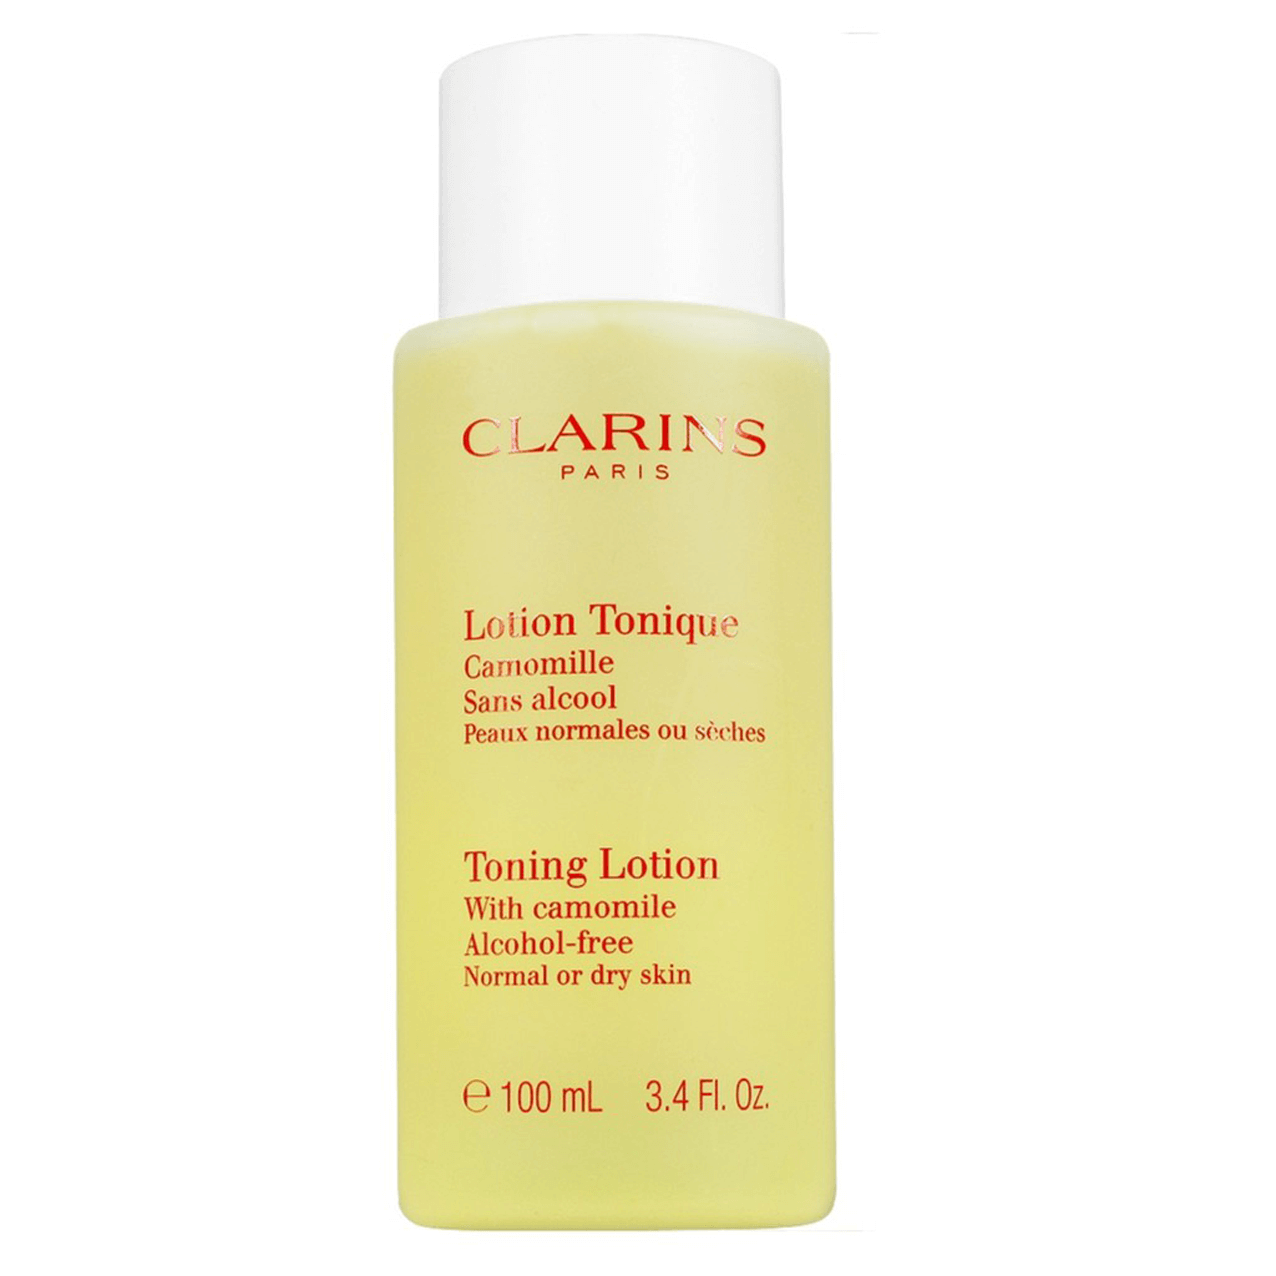 CLARINS Lotion Tonique Toning Lotion With Alcohol-free Normal skin 100 ml. Thisshop